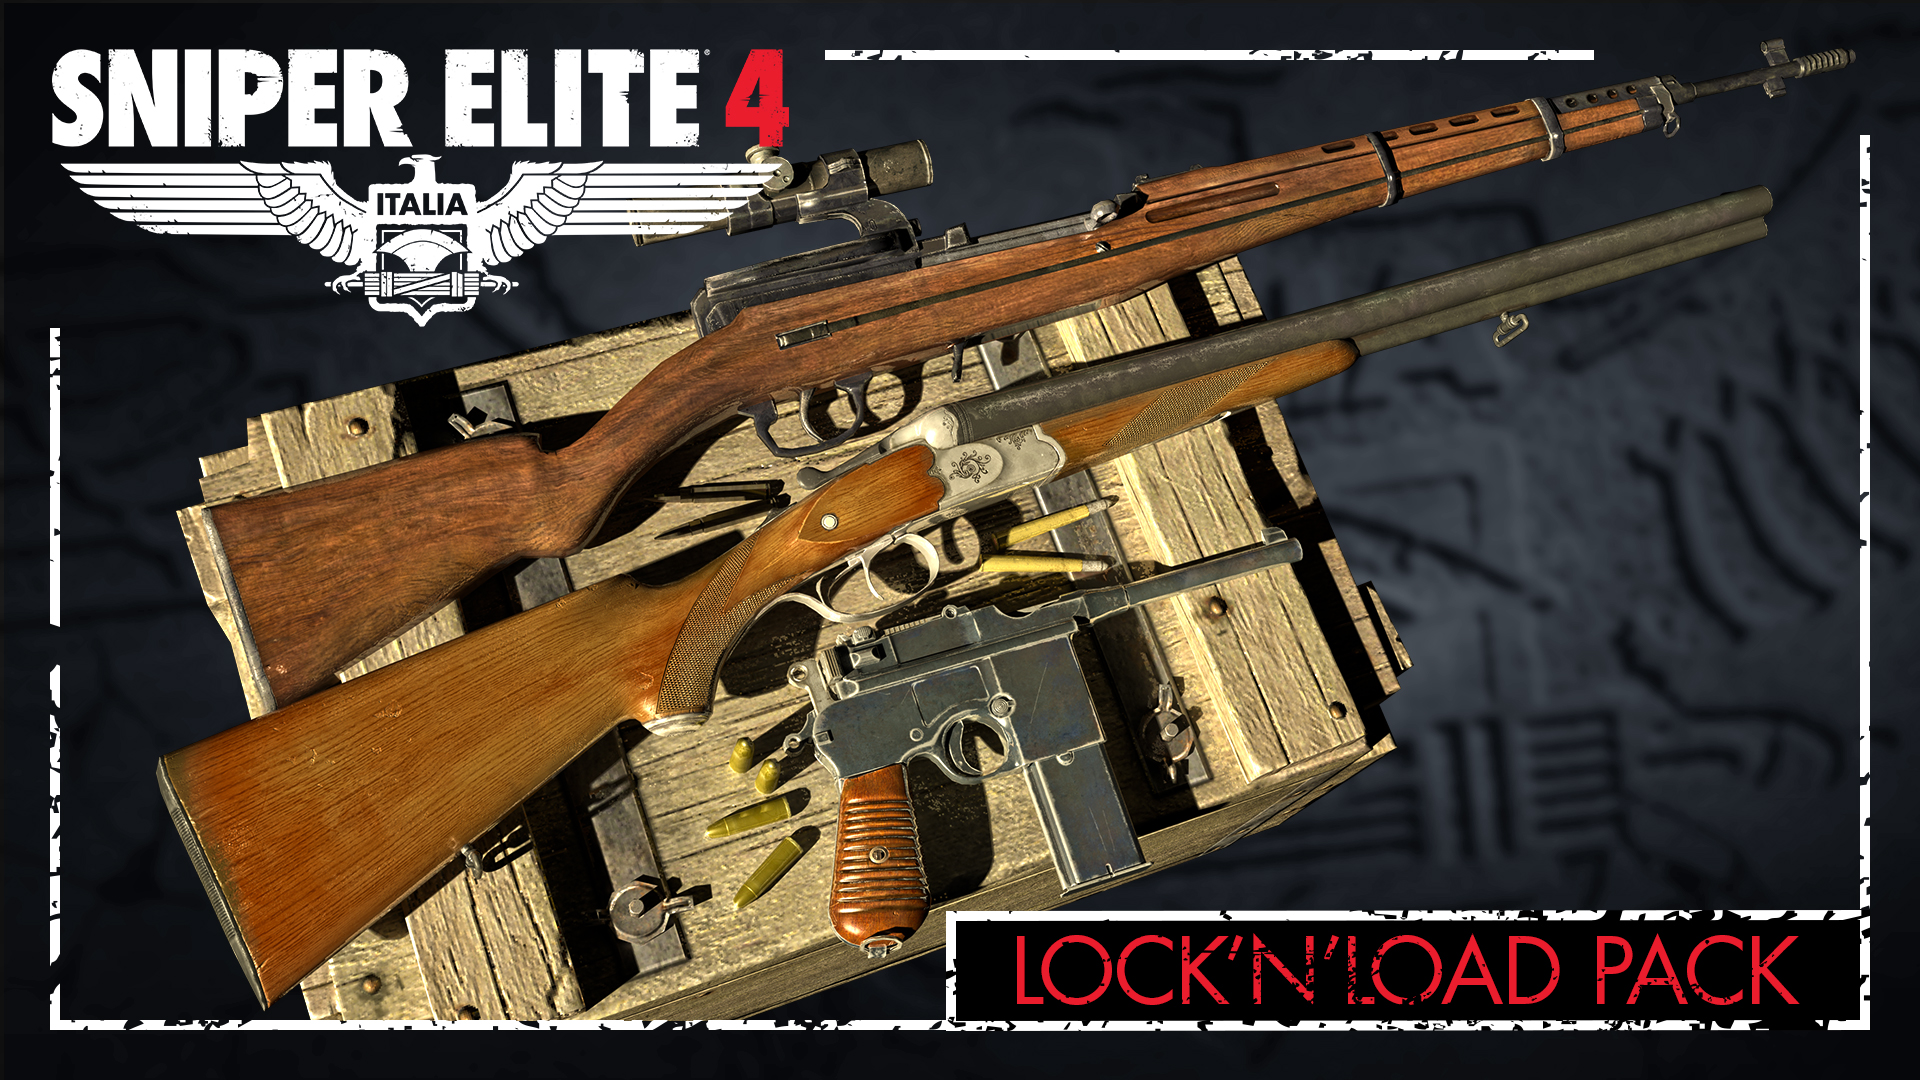 Sniper Elite 4 - Lock and Load Weapons Pack DLC Steam CD Key, $4.51